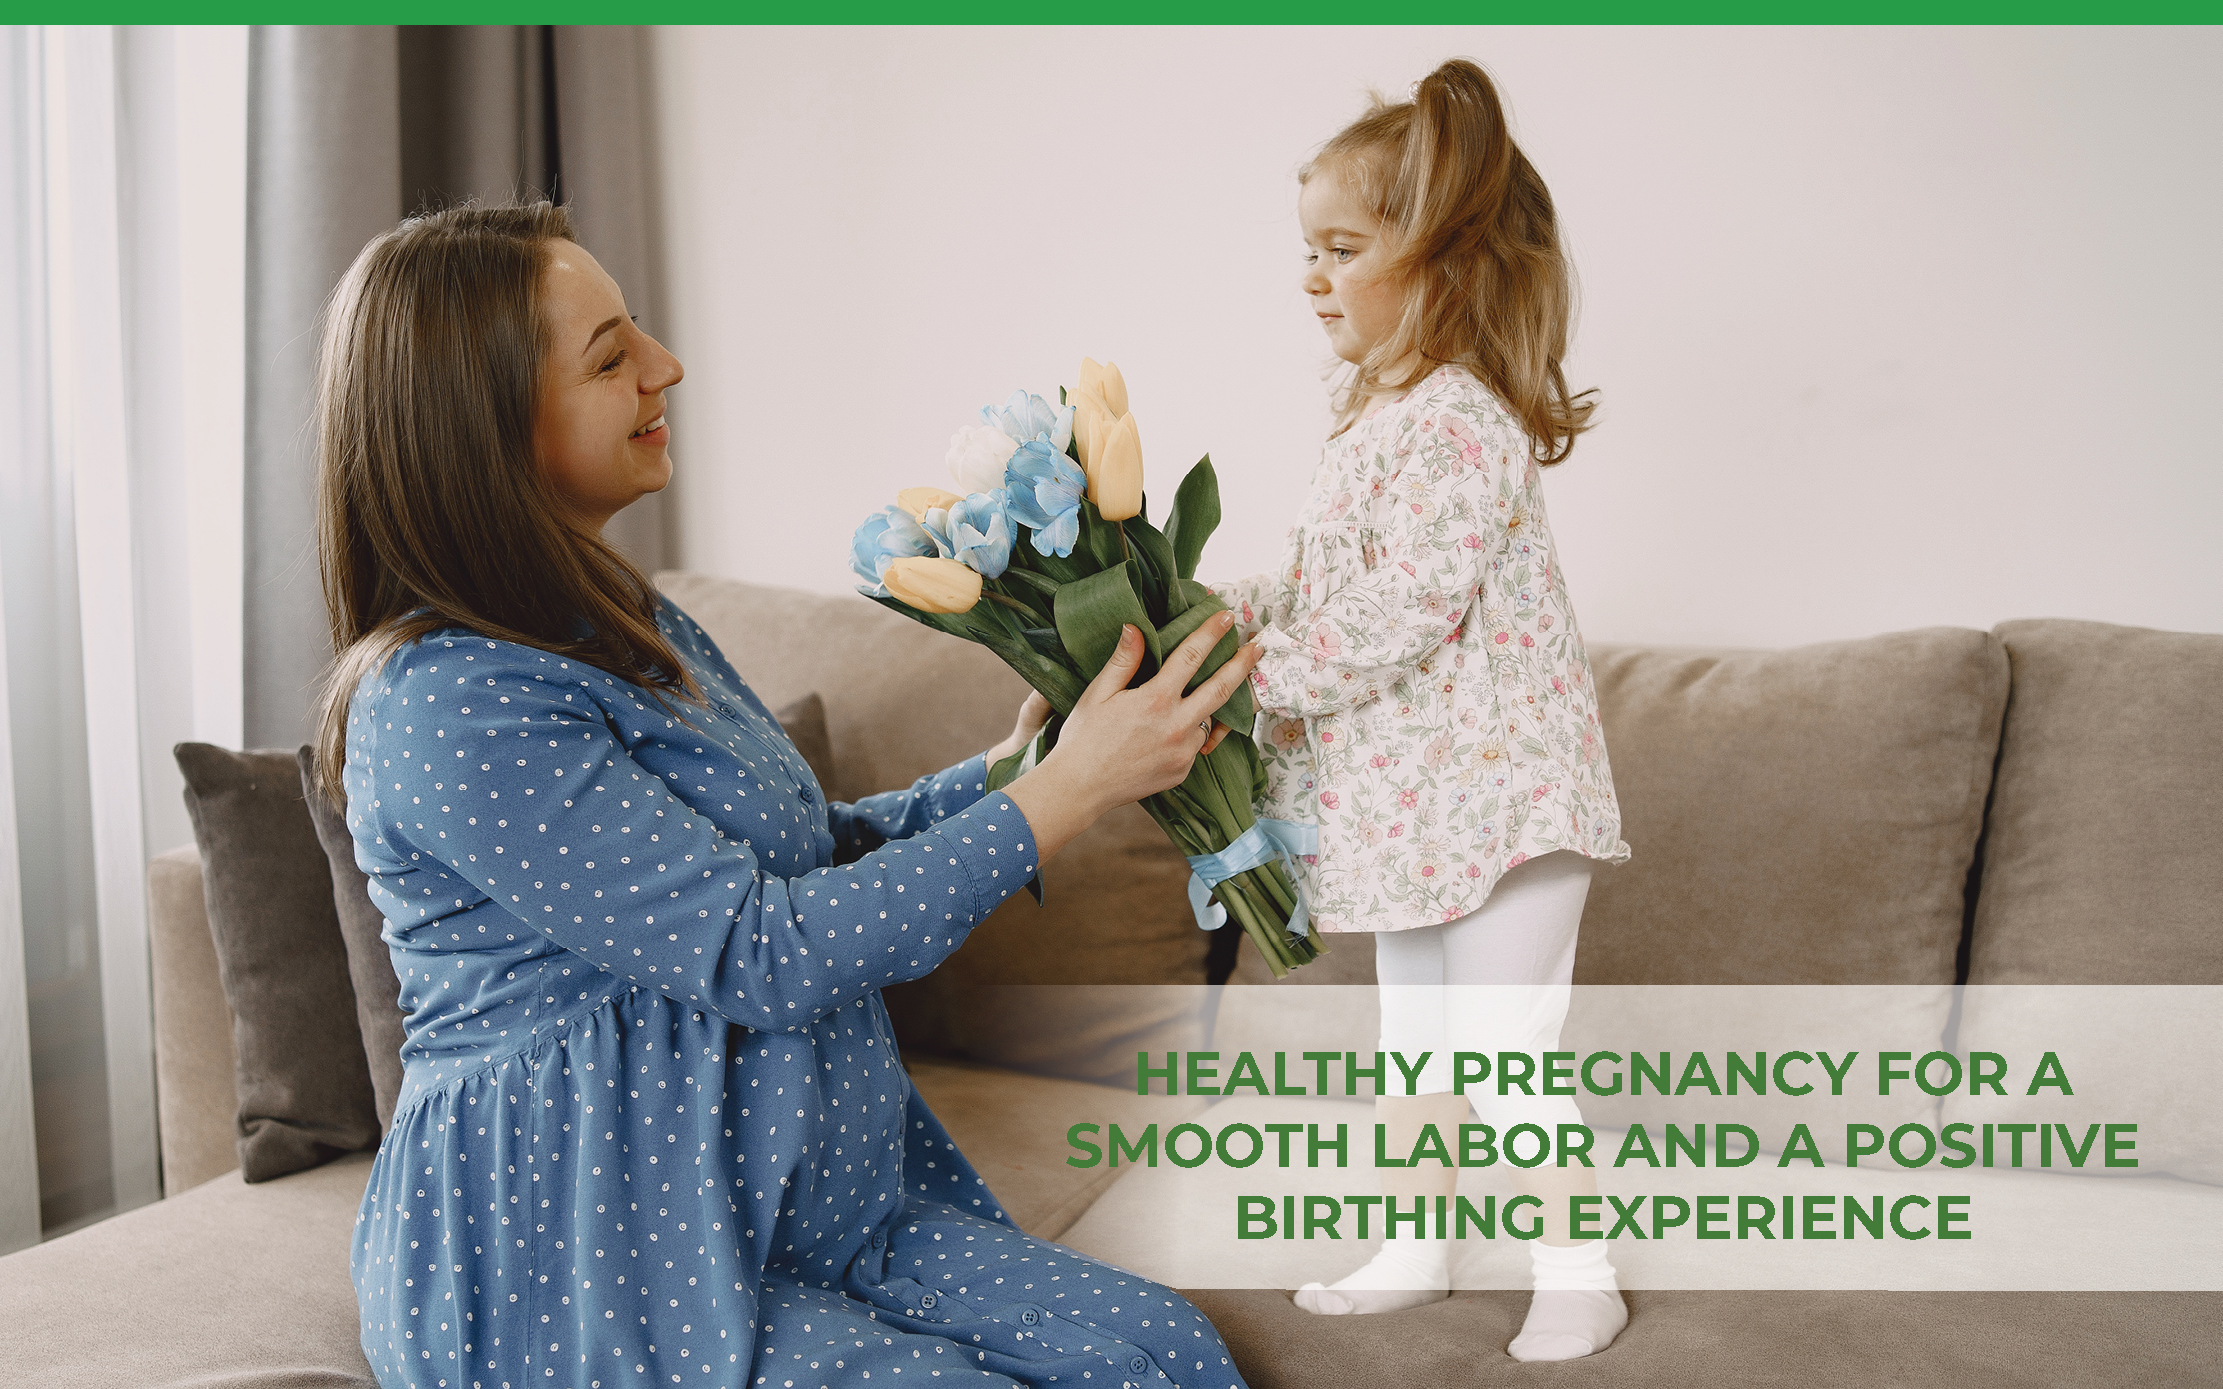 Webinar on Healthy and Positive Childbirth Experience